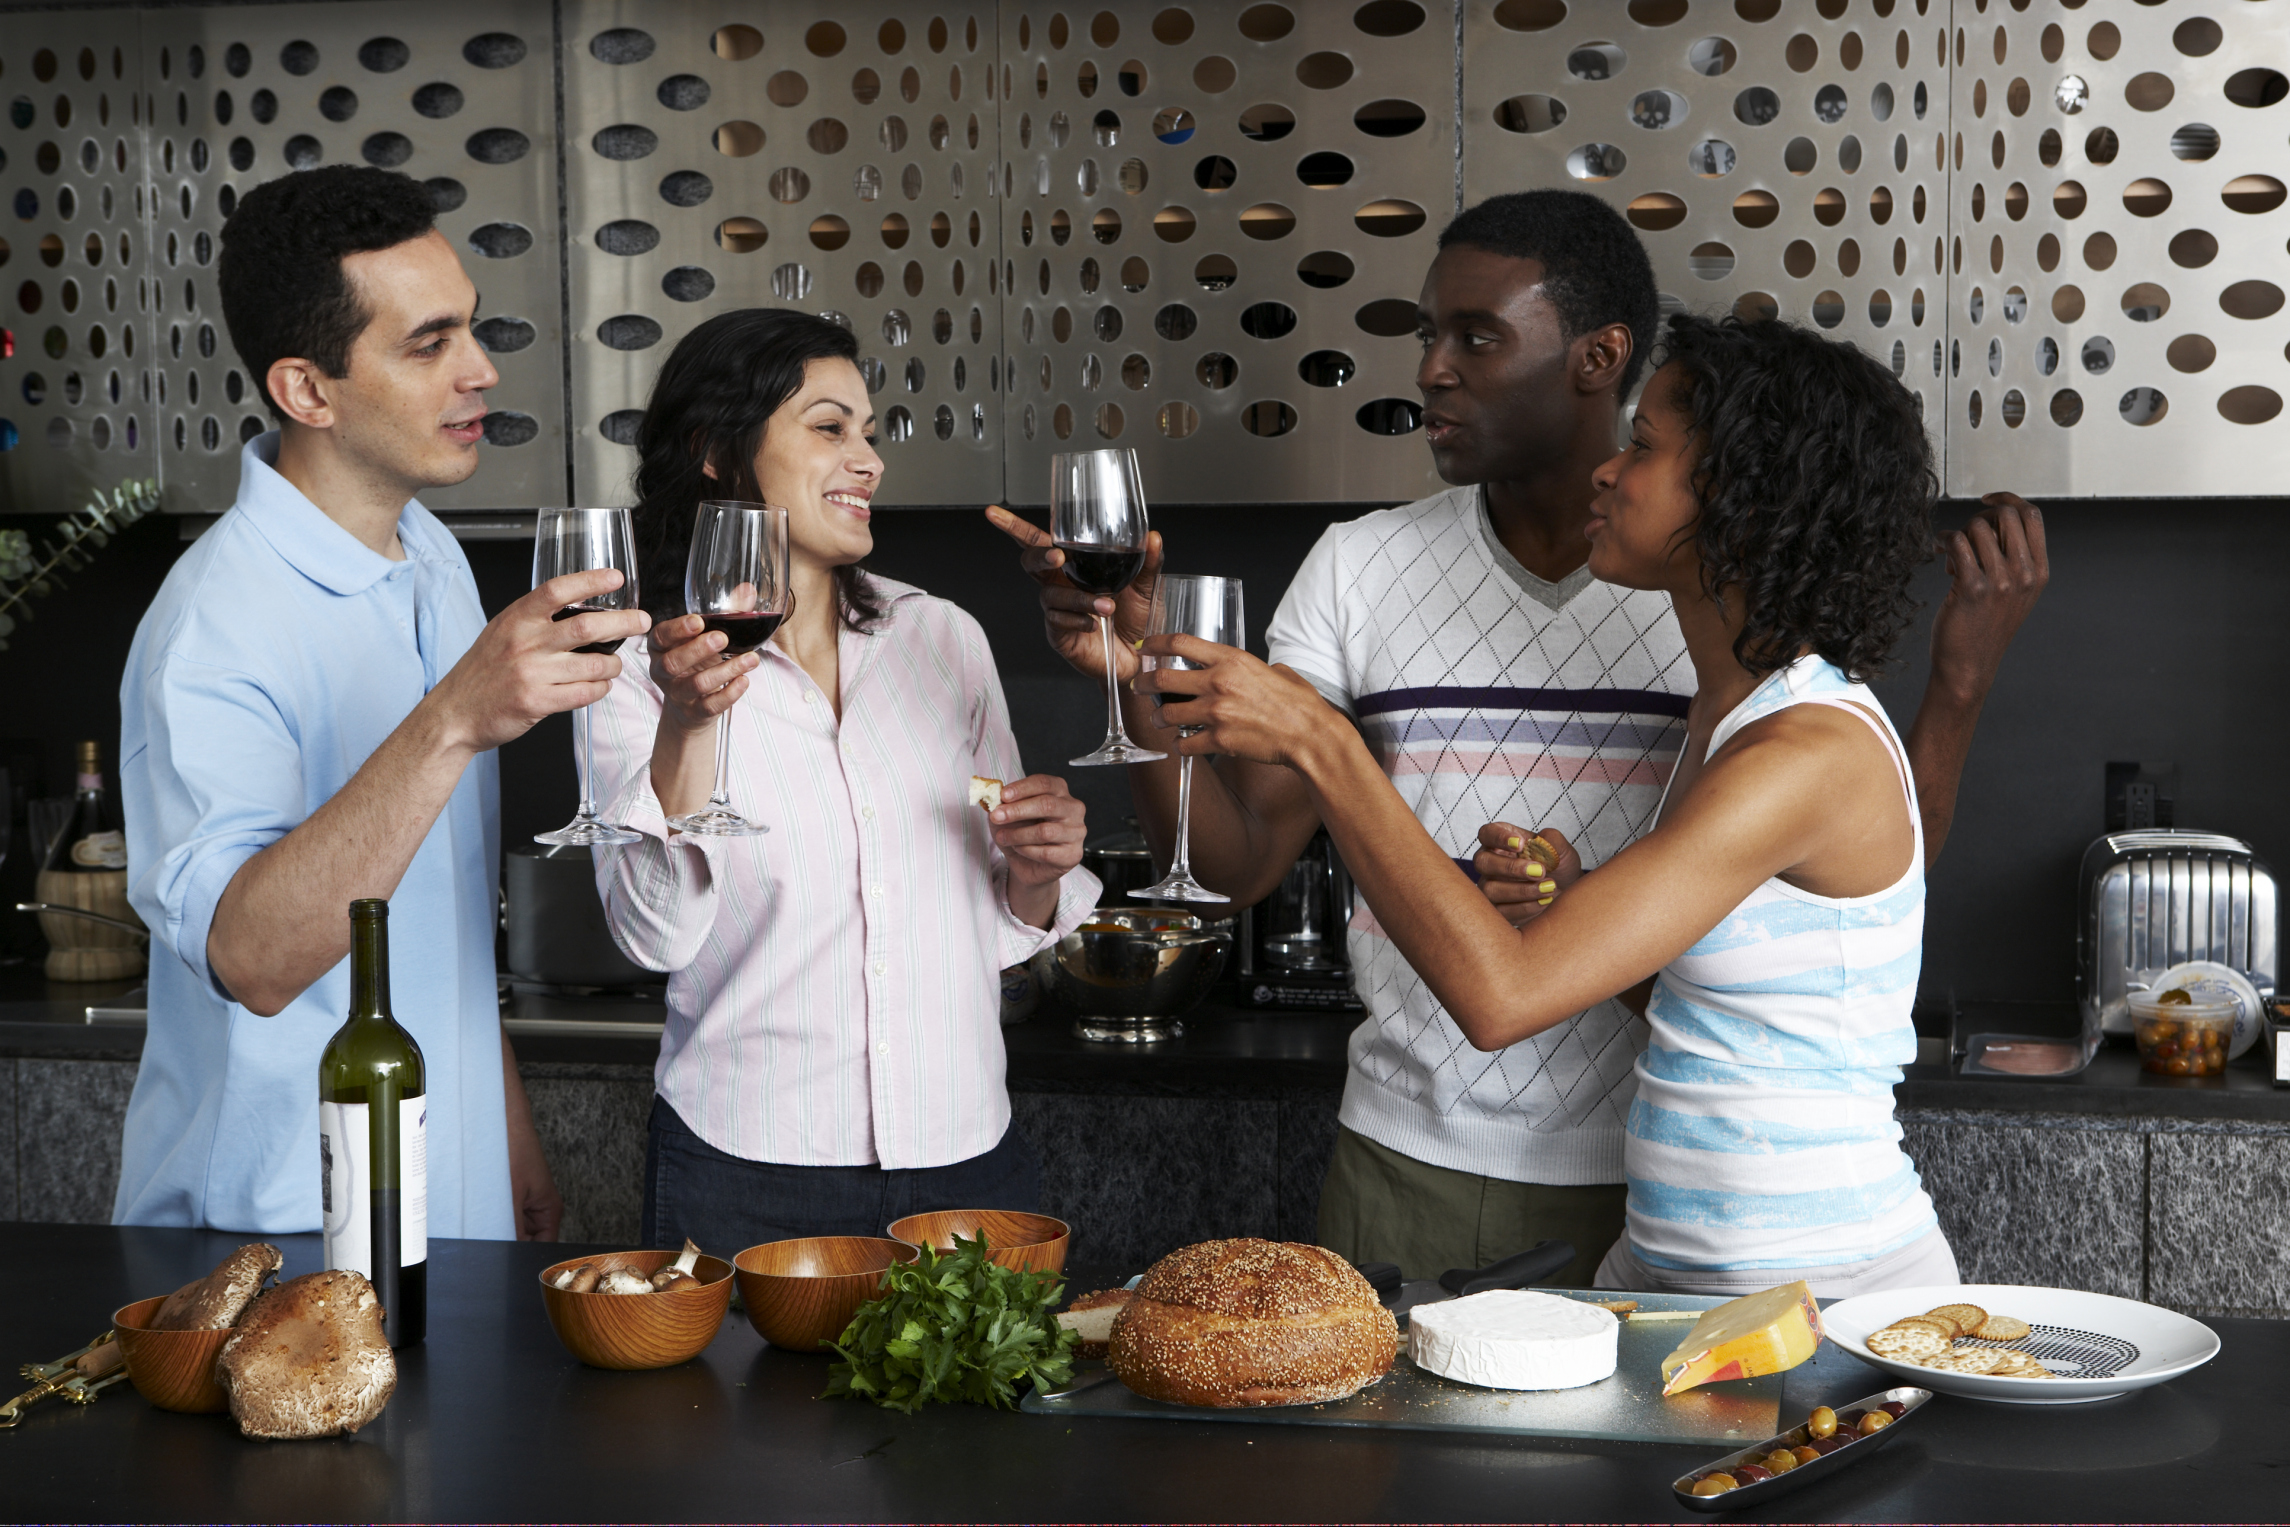 How to Host an Open House Party